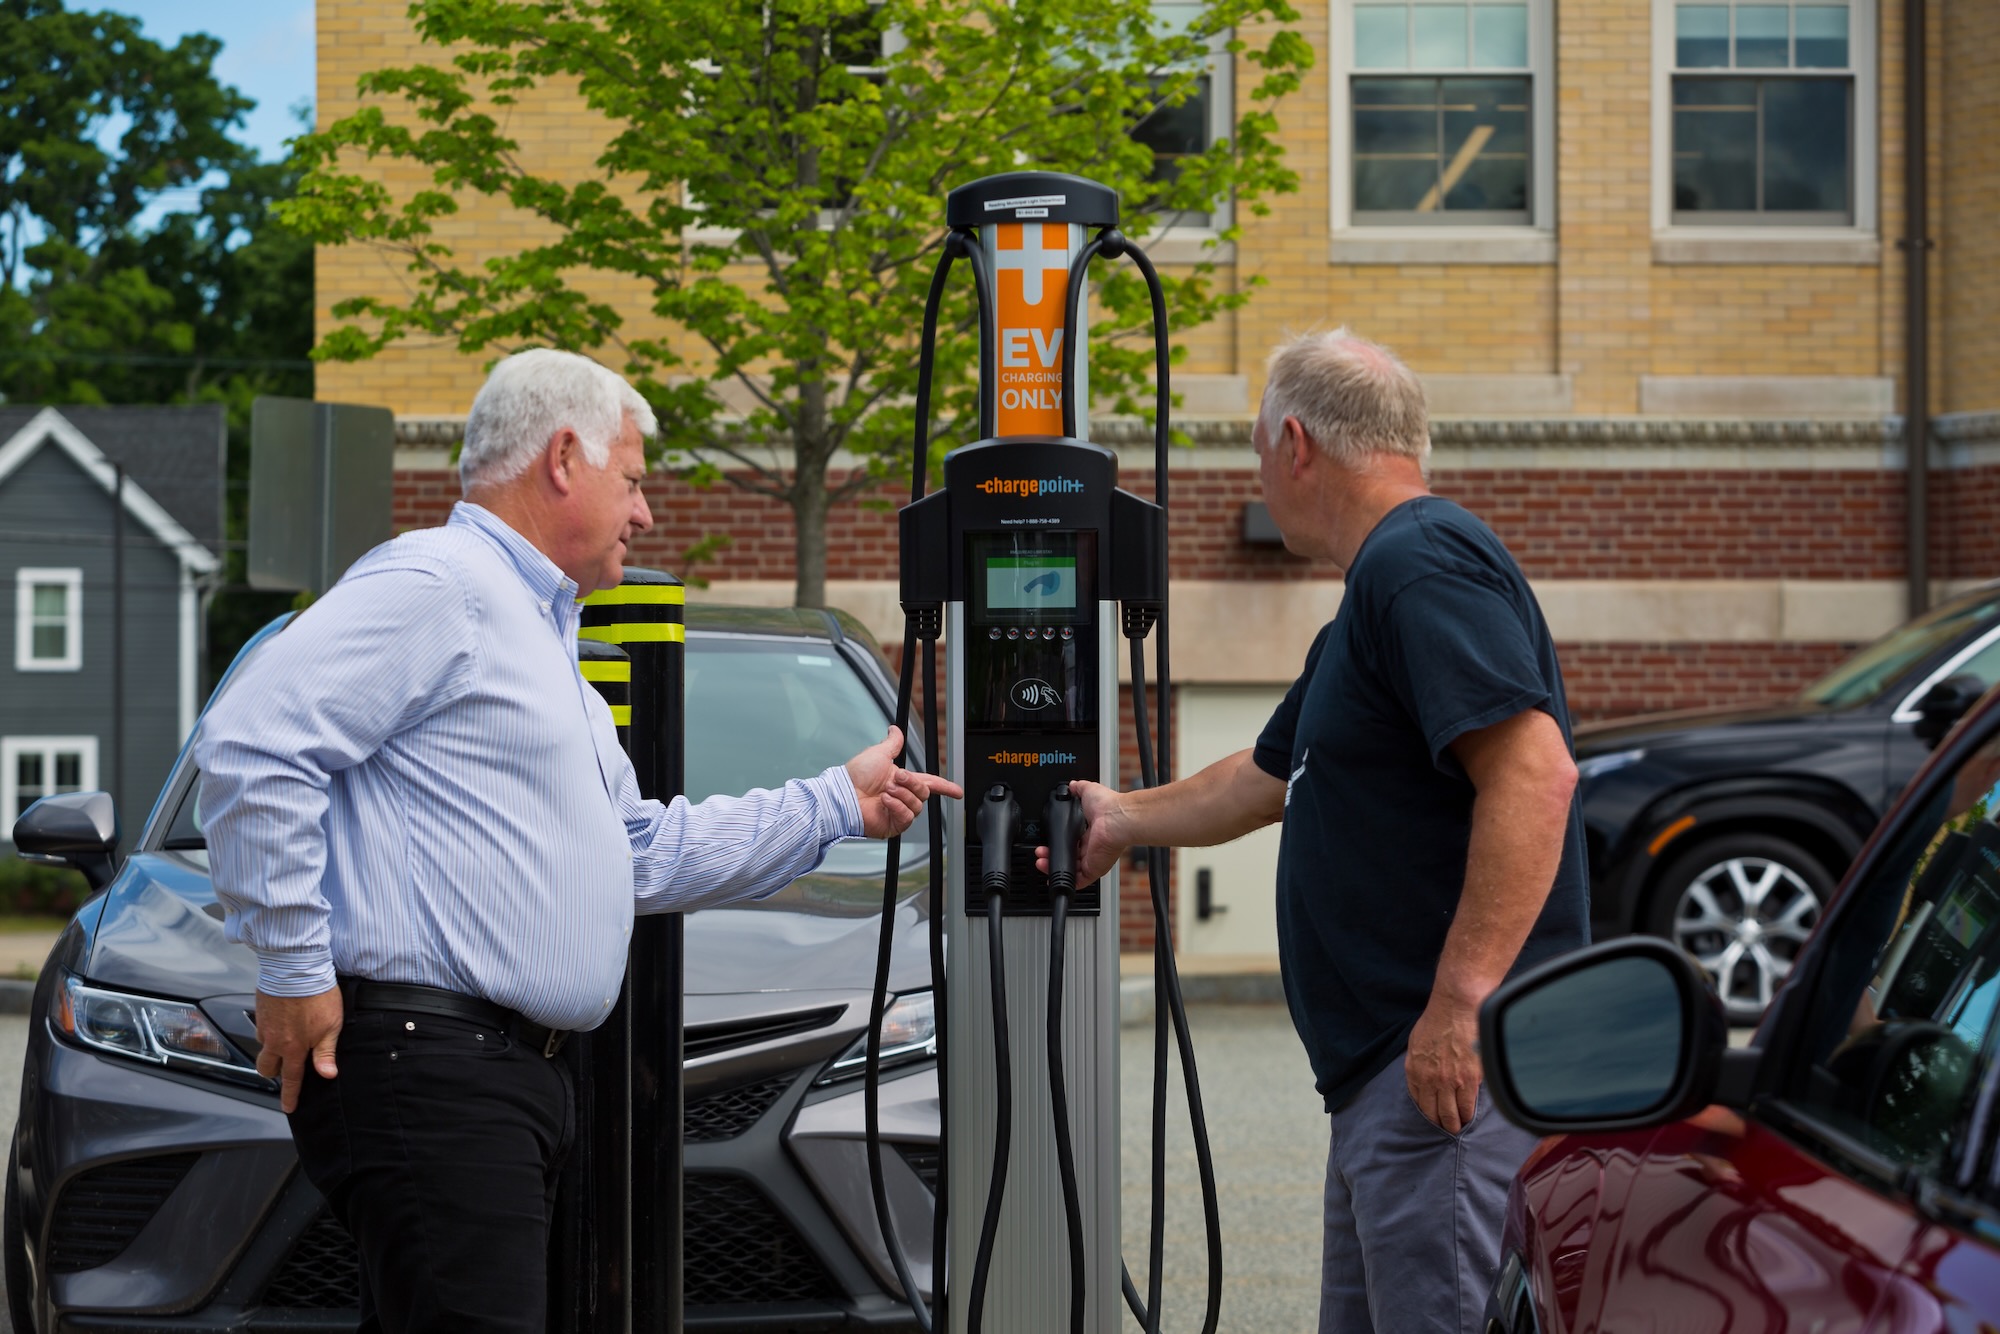 rmld-completes-installation-of-five-new-public-ev-charging-stations